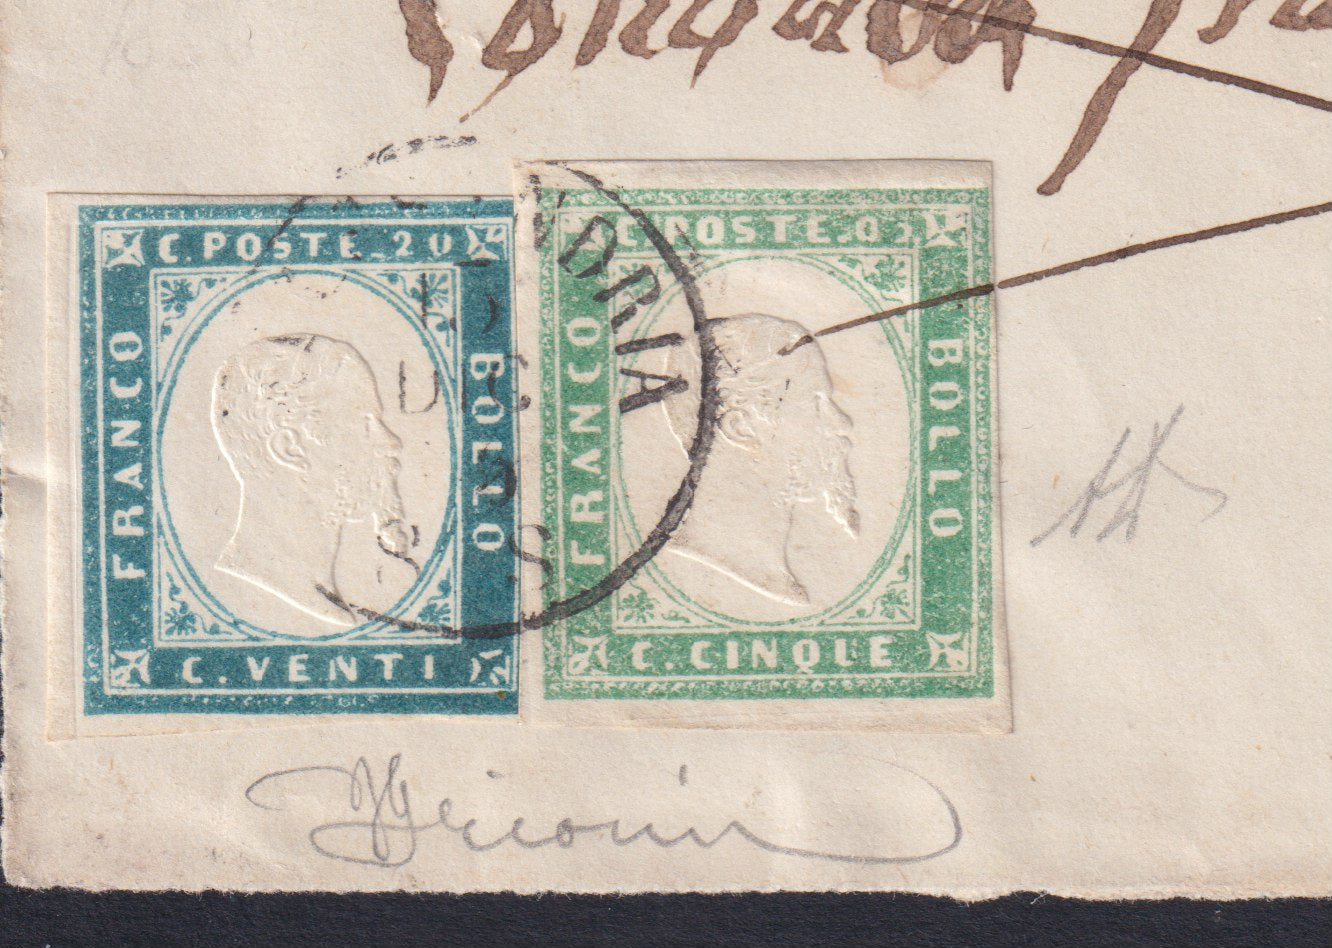 F13-76 - 1856 - IV issue, Title page of letter sent from Alessandria to Milan 12/13/56 stamped with c. 5 green Pea I composition + c. 20 milky cobalt (13c + 15ca)